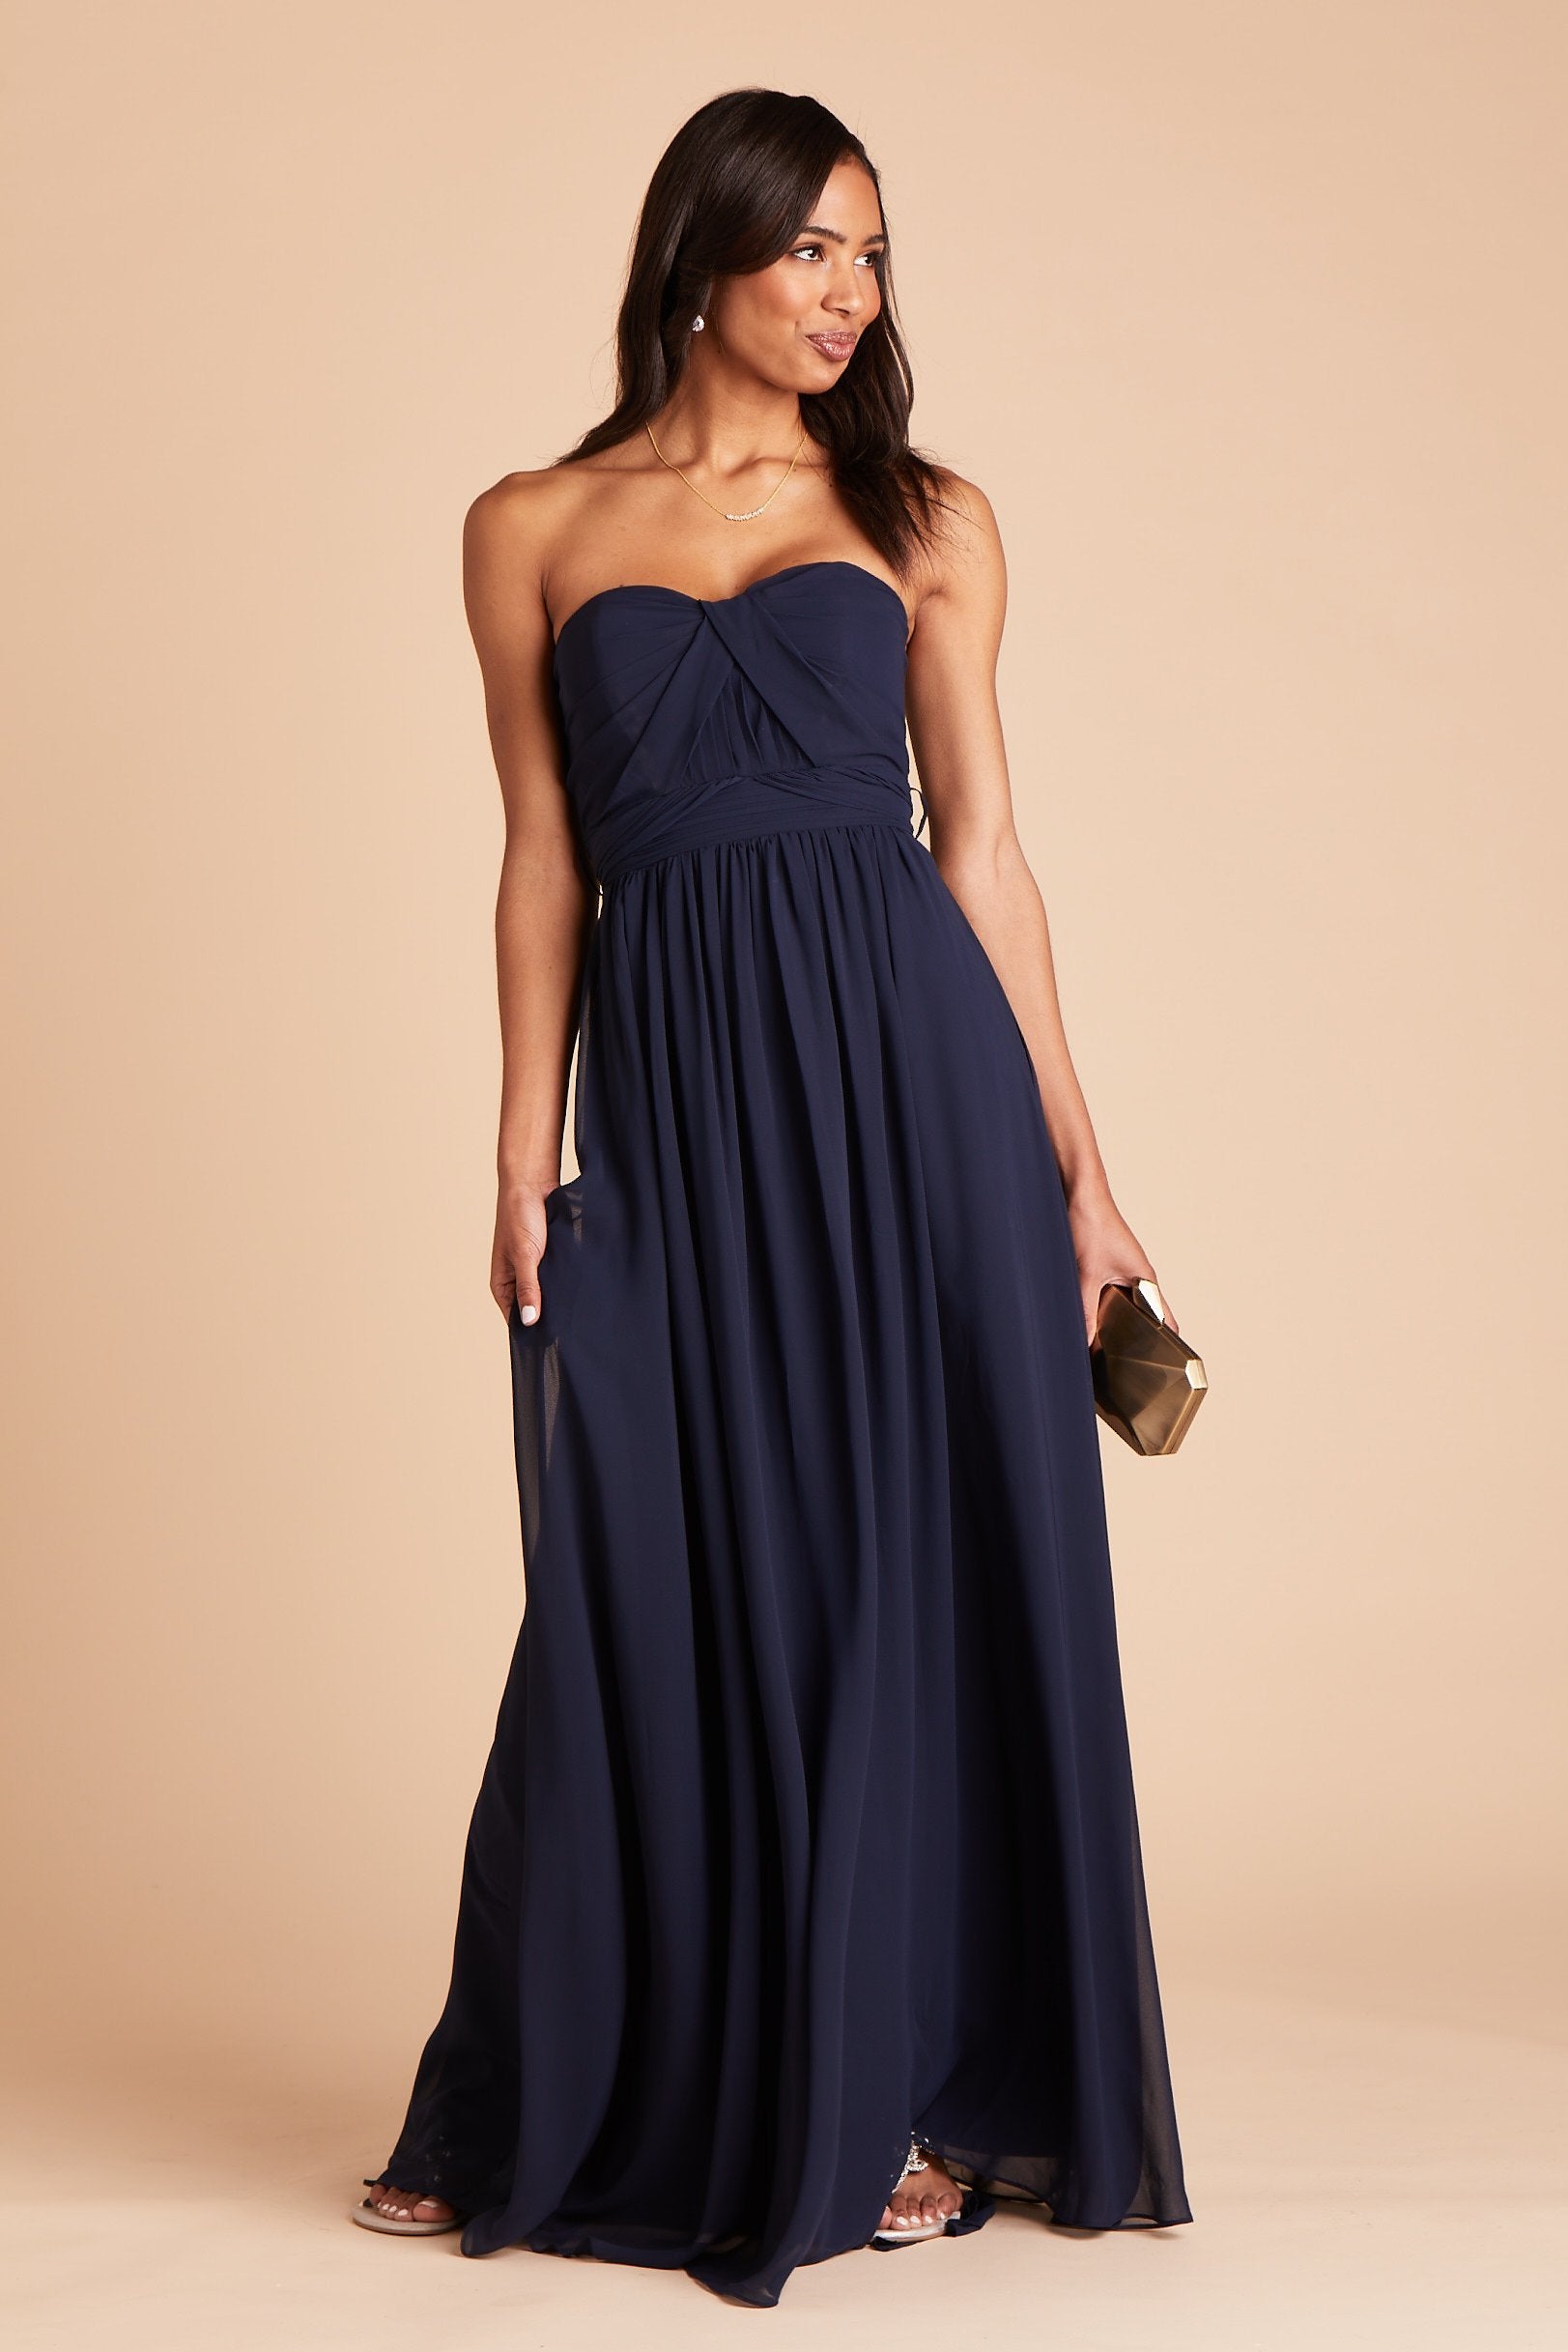 Grace convertible bridesmaid dress in navy blue chiffon by Birdy Grey, front view